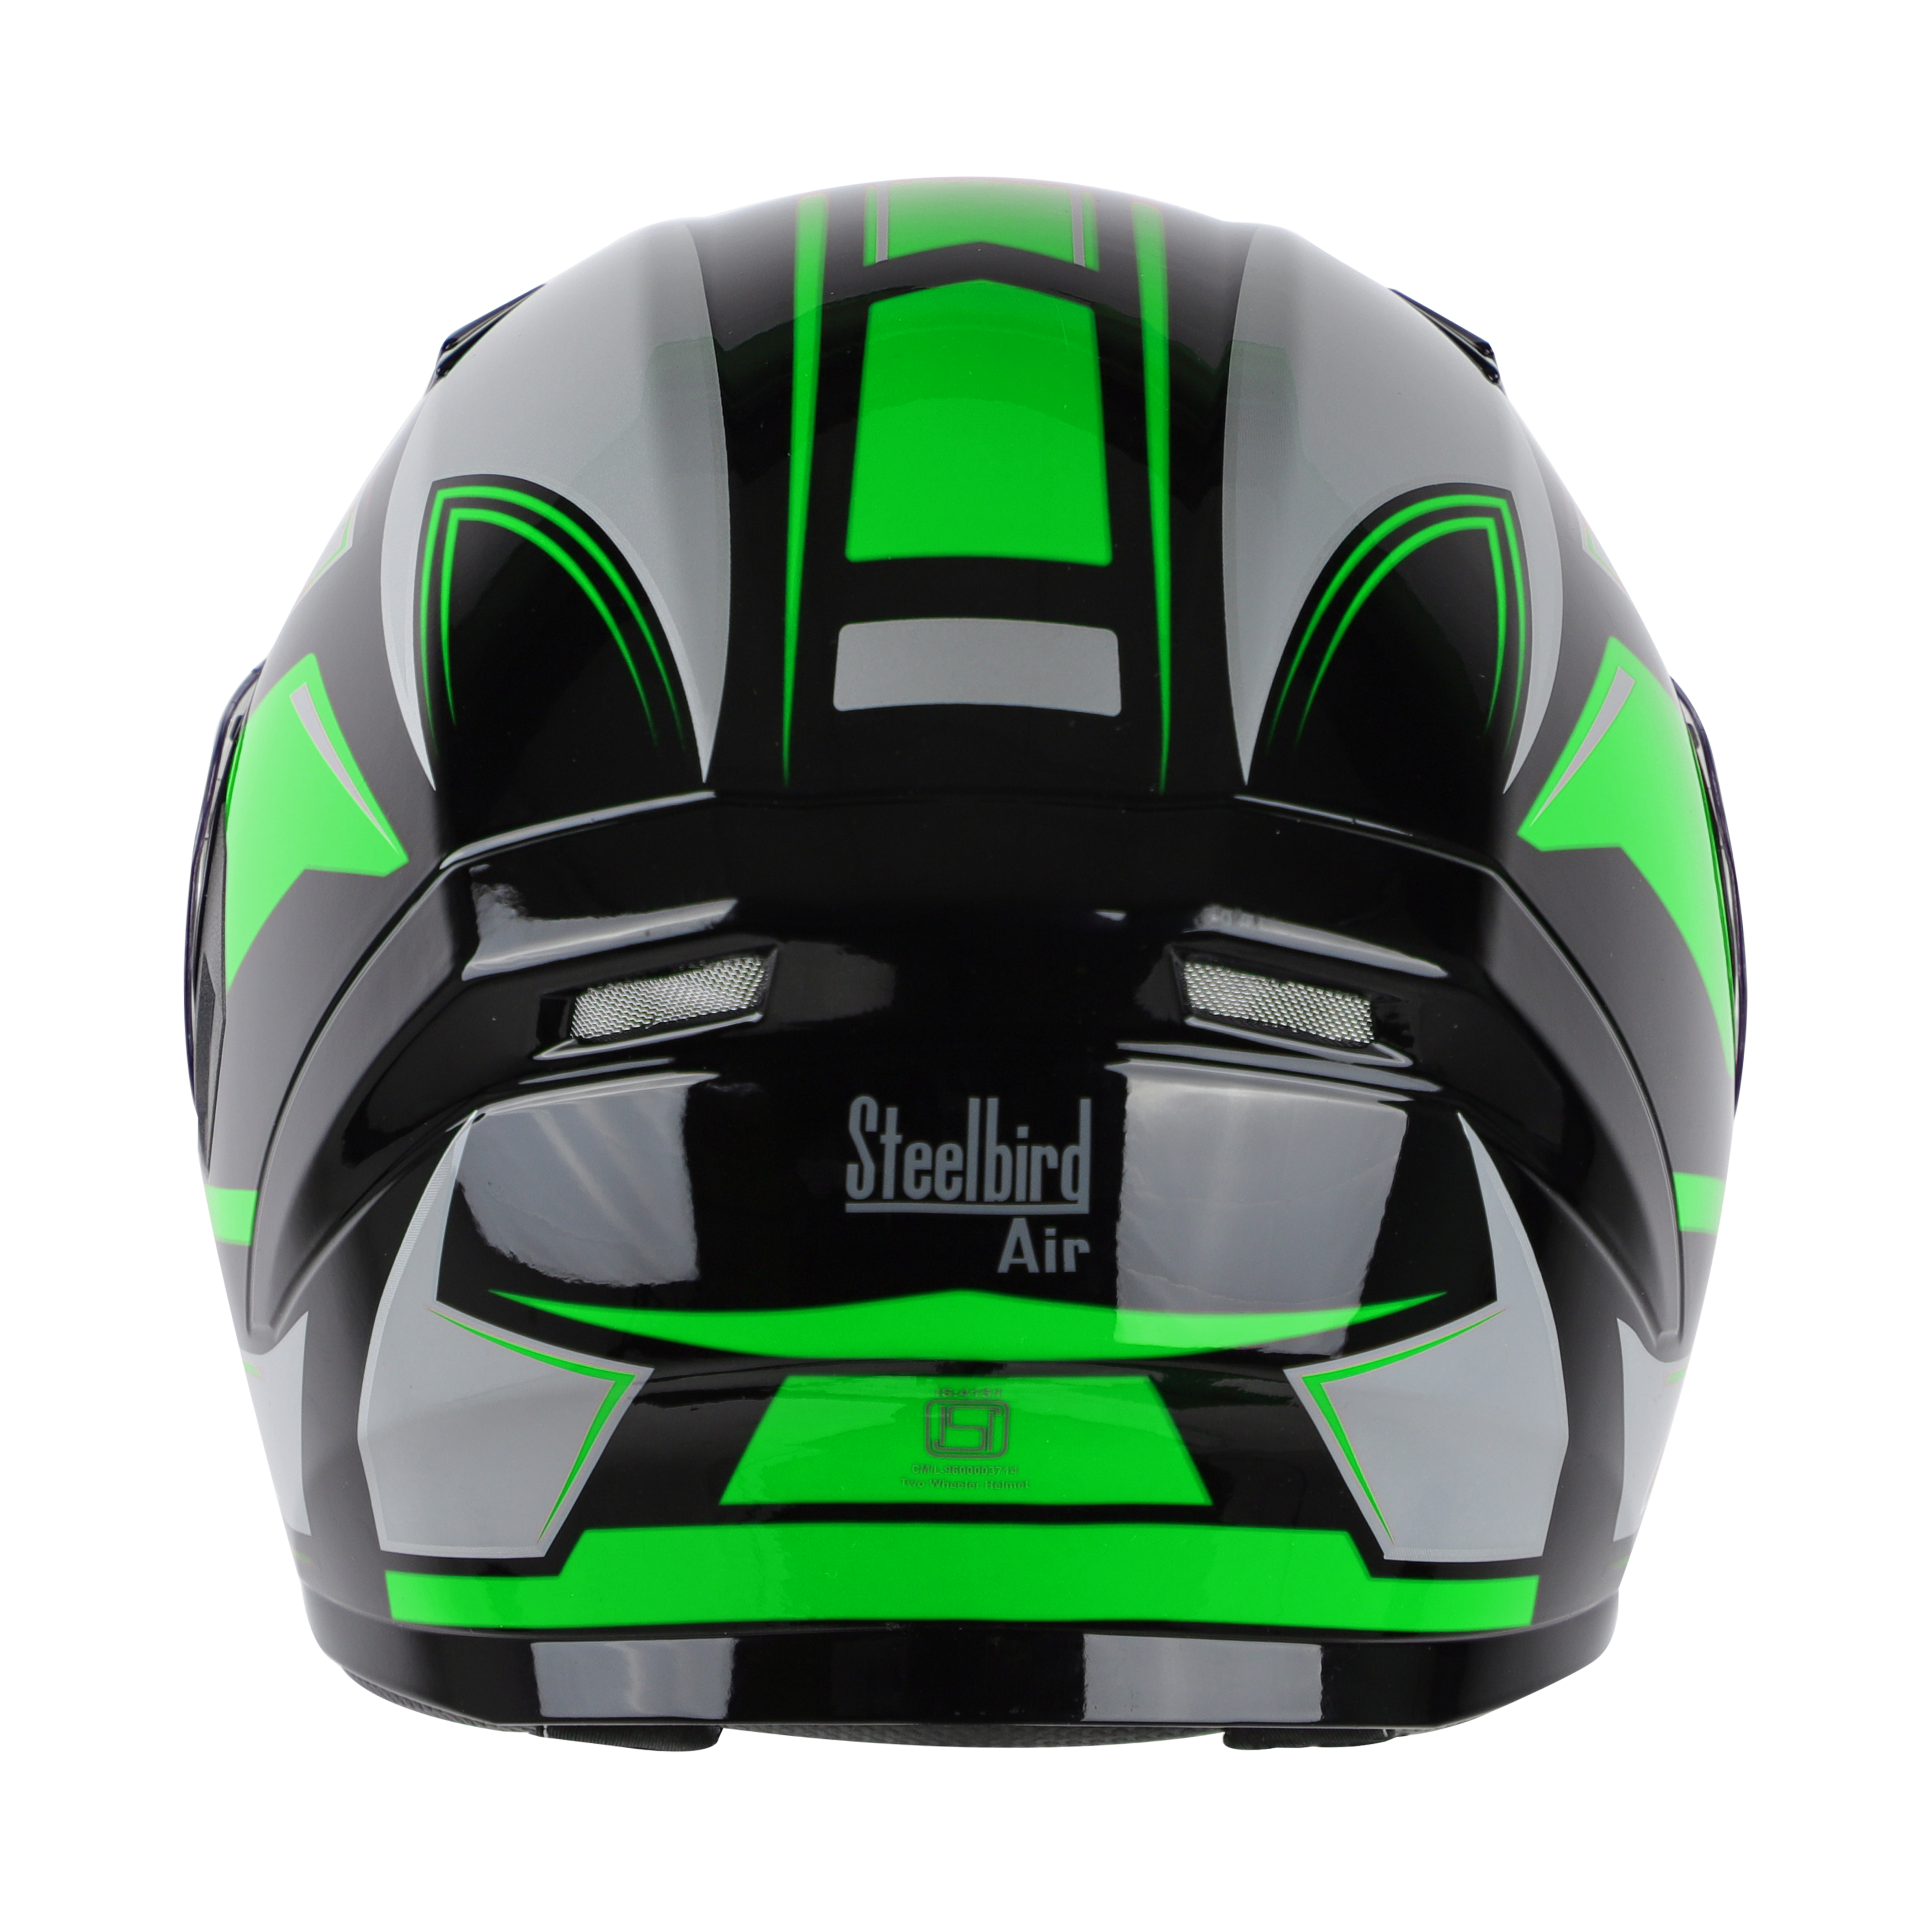 SBA-21 AIR CARBON GLOSSY BLACK WITH GREEN (WITH CHROME SILVER INNER SUNSHIELD)